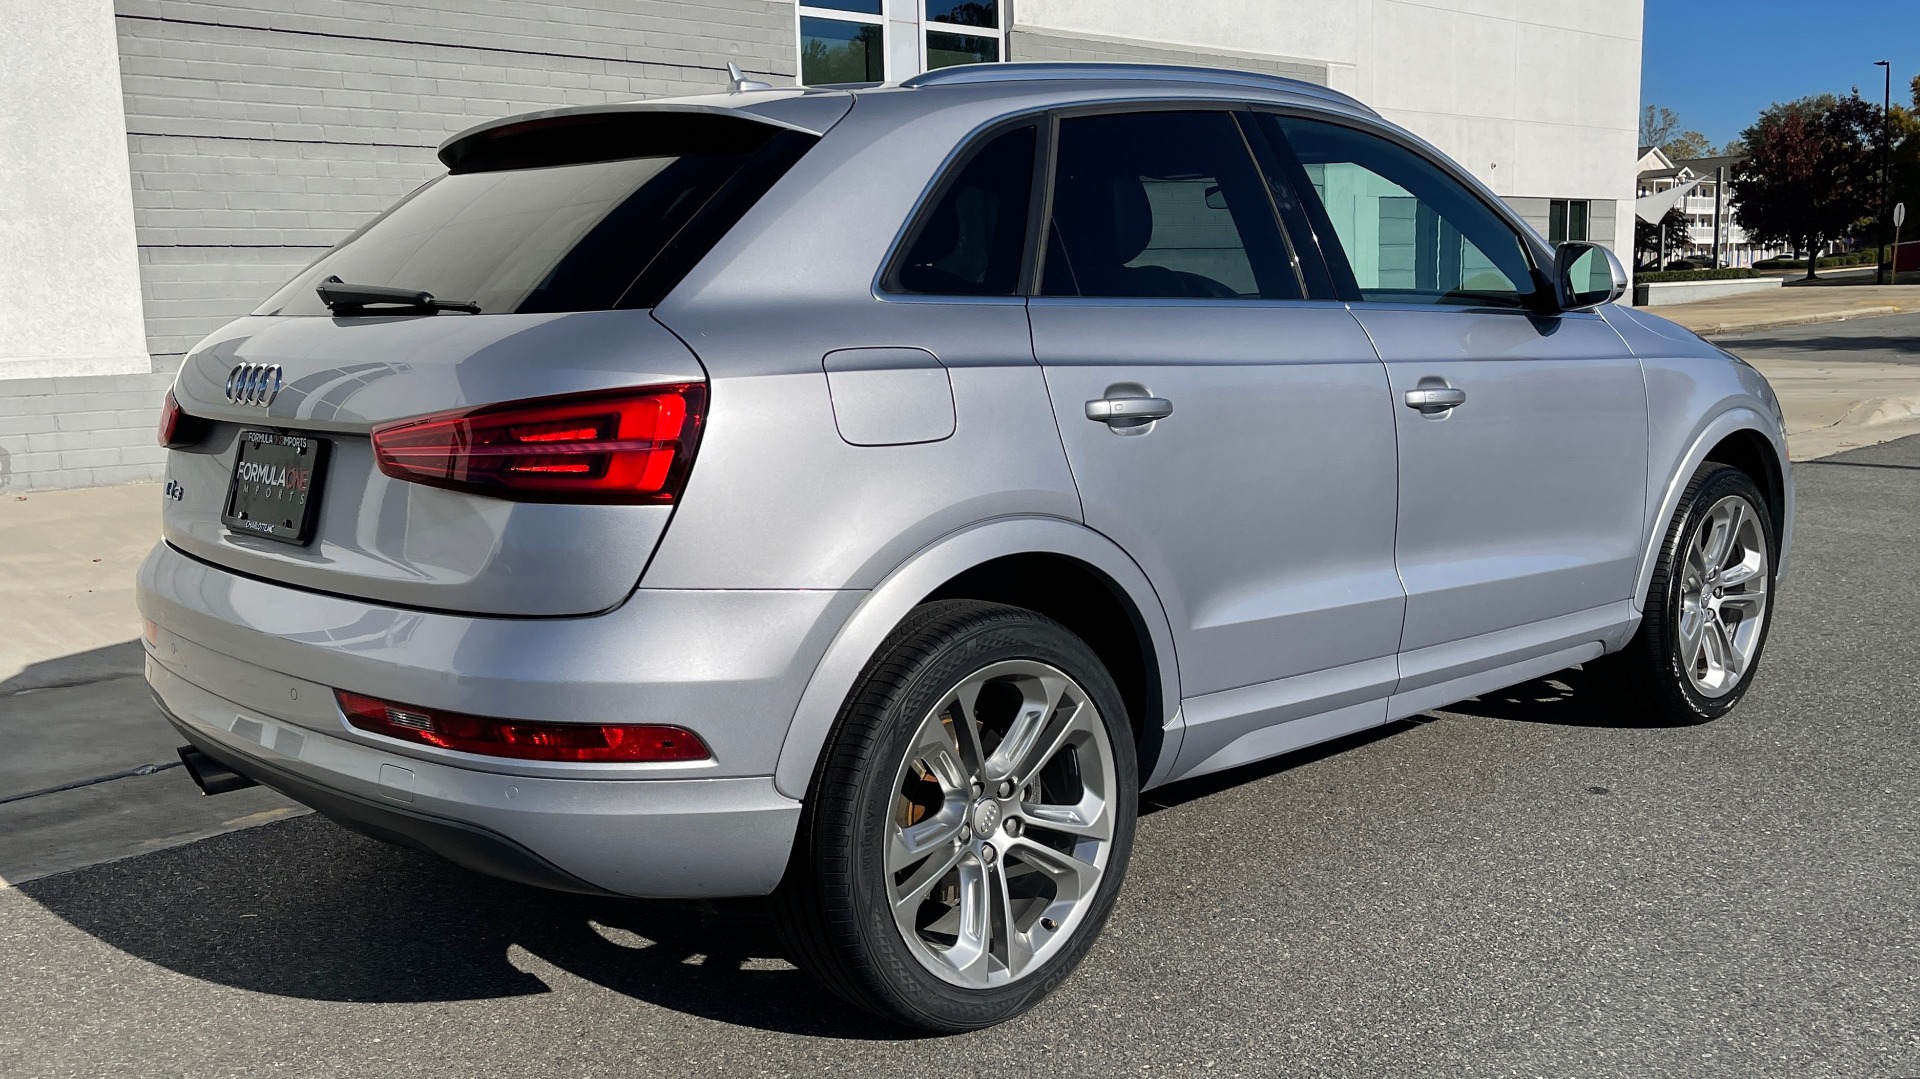 Used 2016 Audi Q3 PREMIUM PLUS 2.0L / PANO-ROOF / HTD STS / 19IN WHEELS / REARVIEW for sale Sold at Formula Imports in Charlotte NC 28227 8